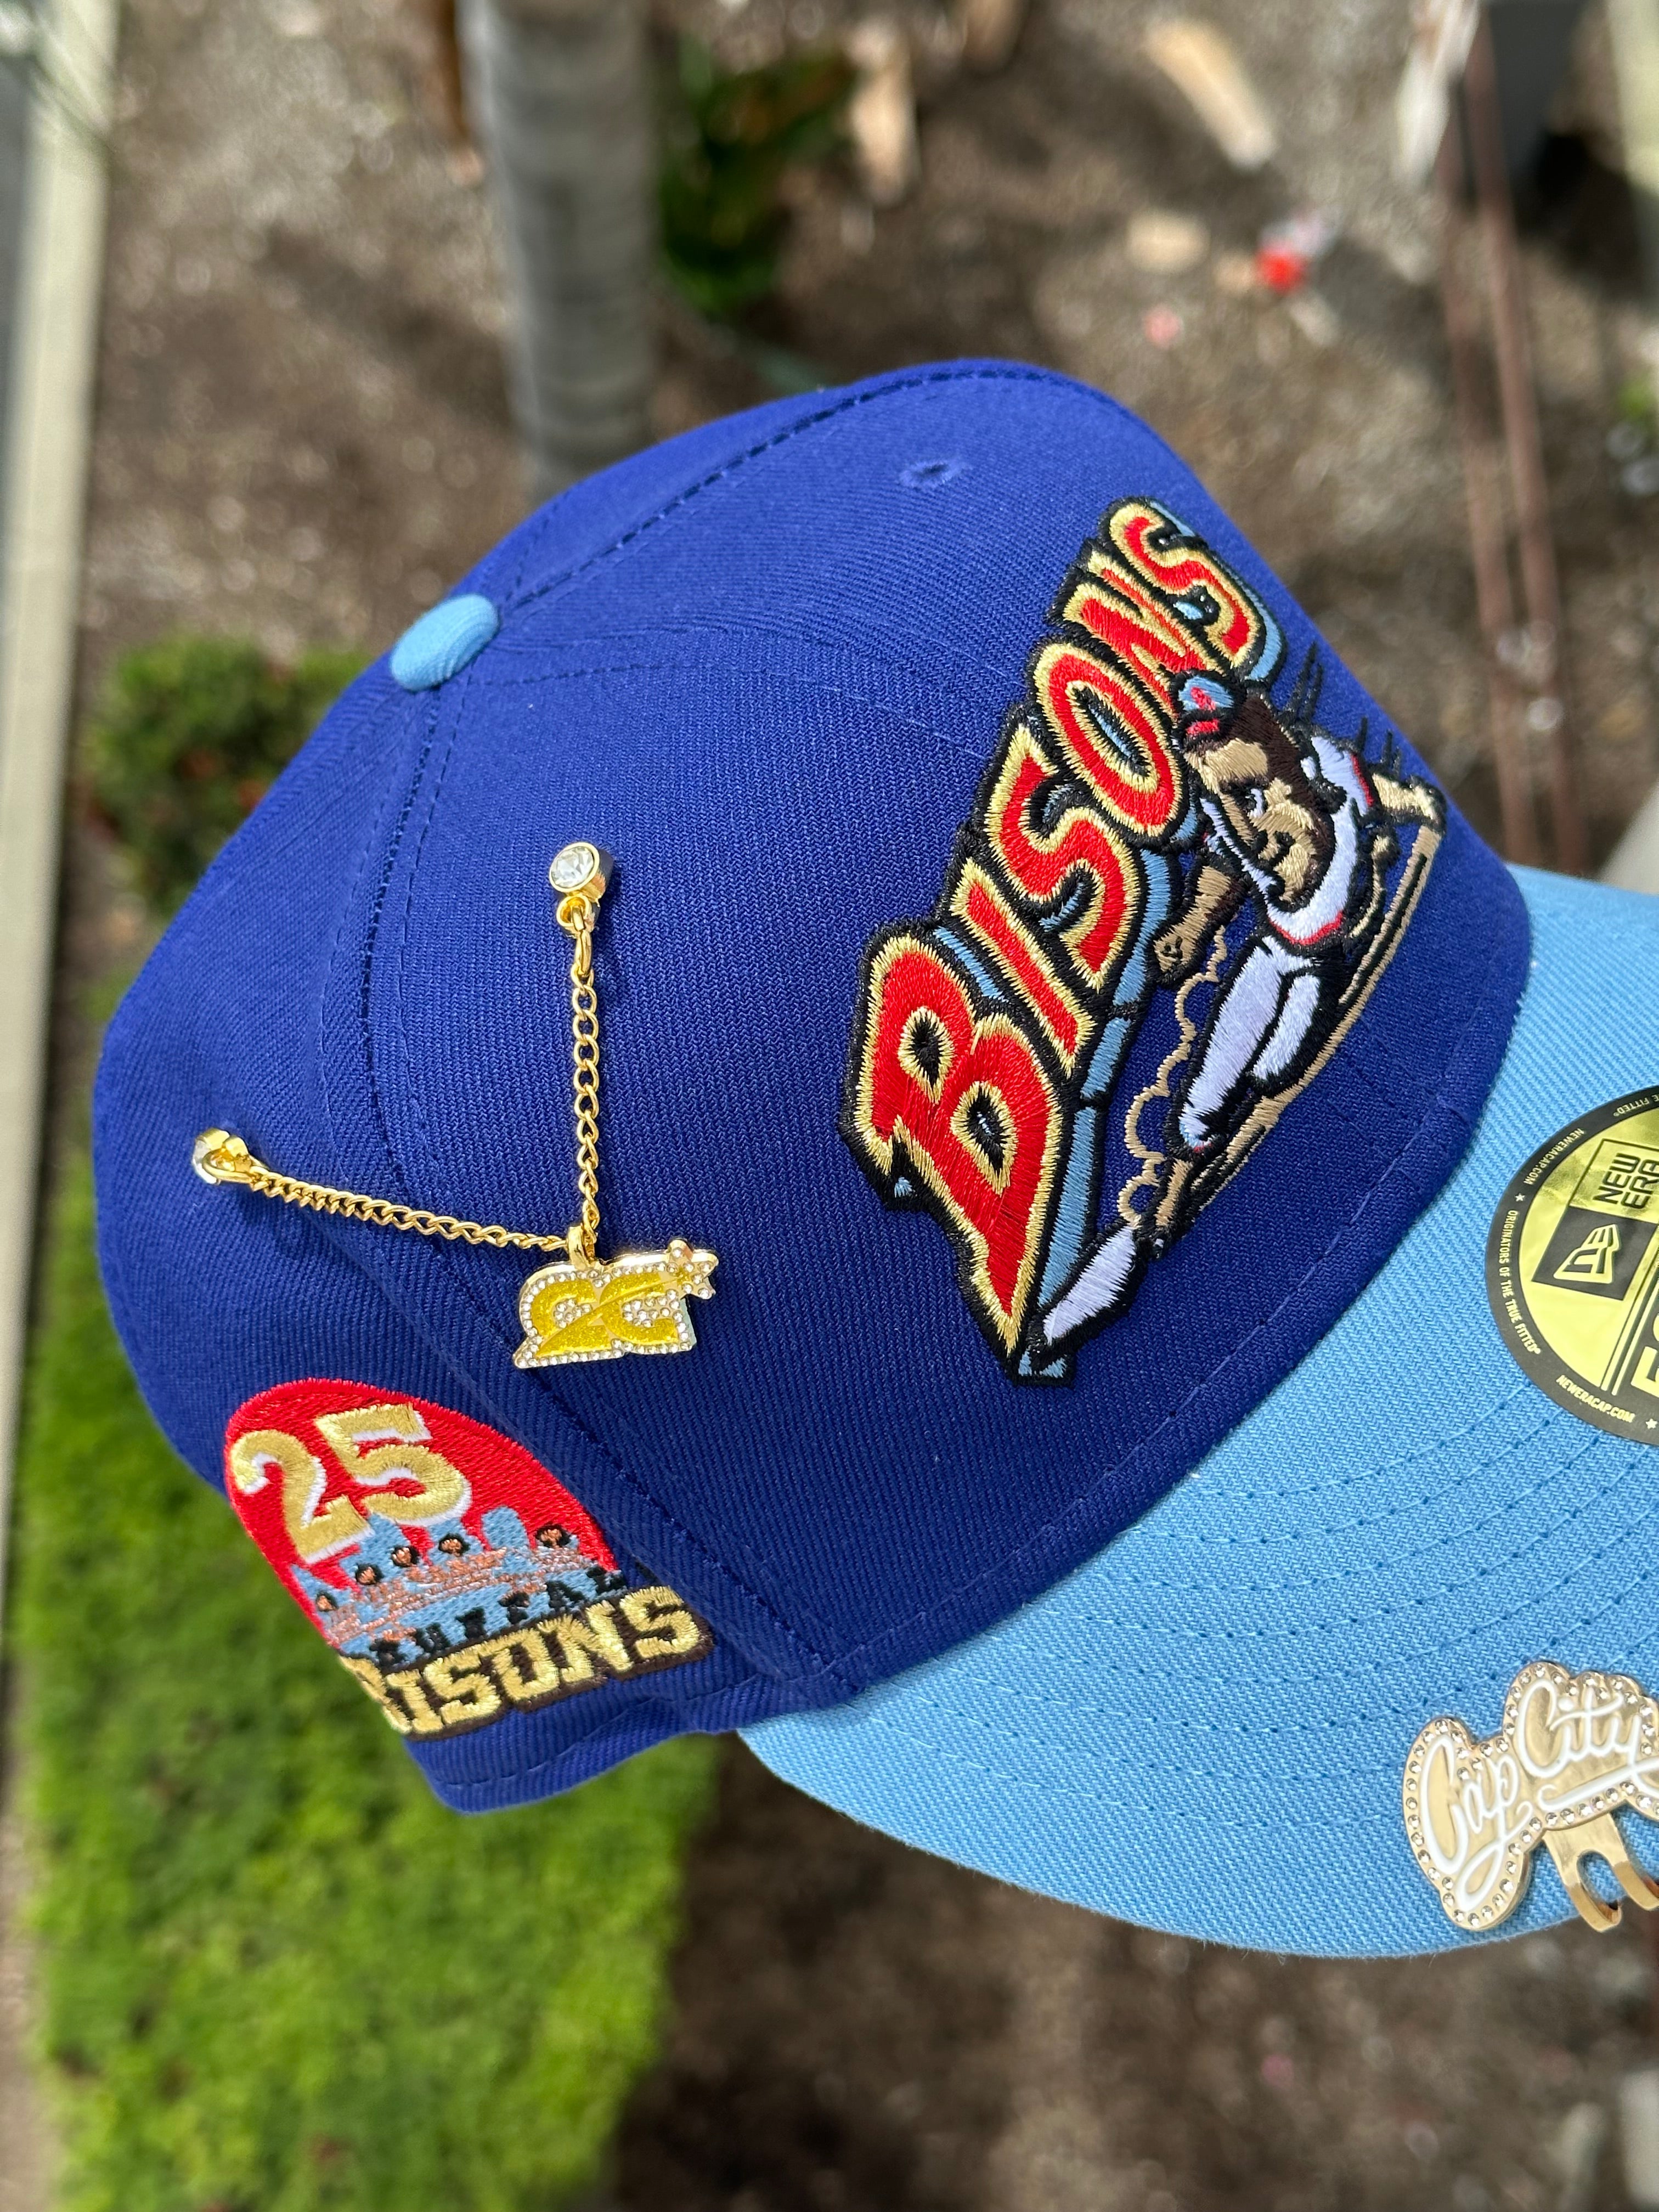 NEW ERA EXCLUSIVE 59FIFTY BLUE/ICY BLUE BUFFALO BISONS W/ 25TH ANNIVERSARY PATCH